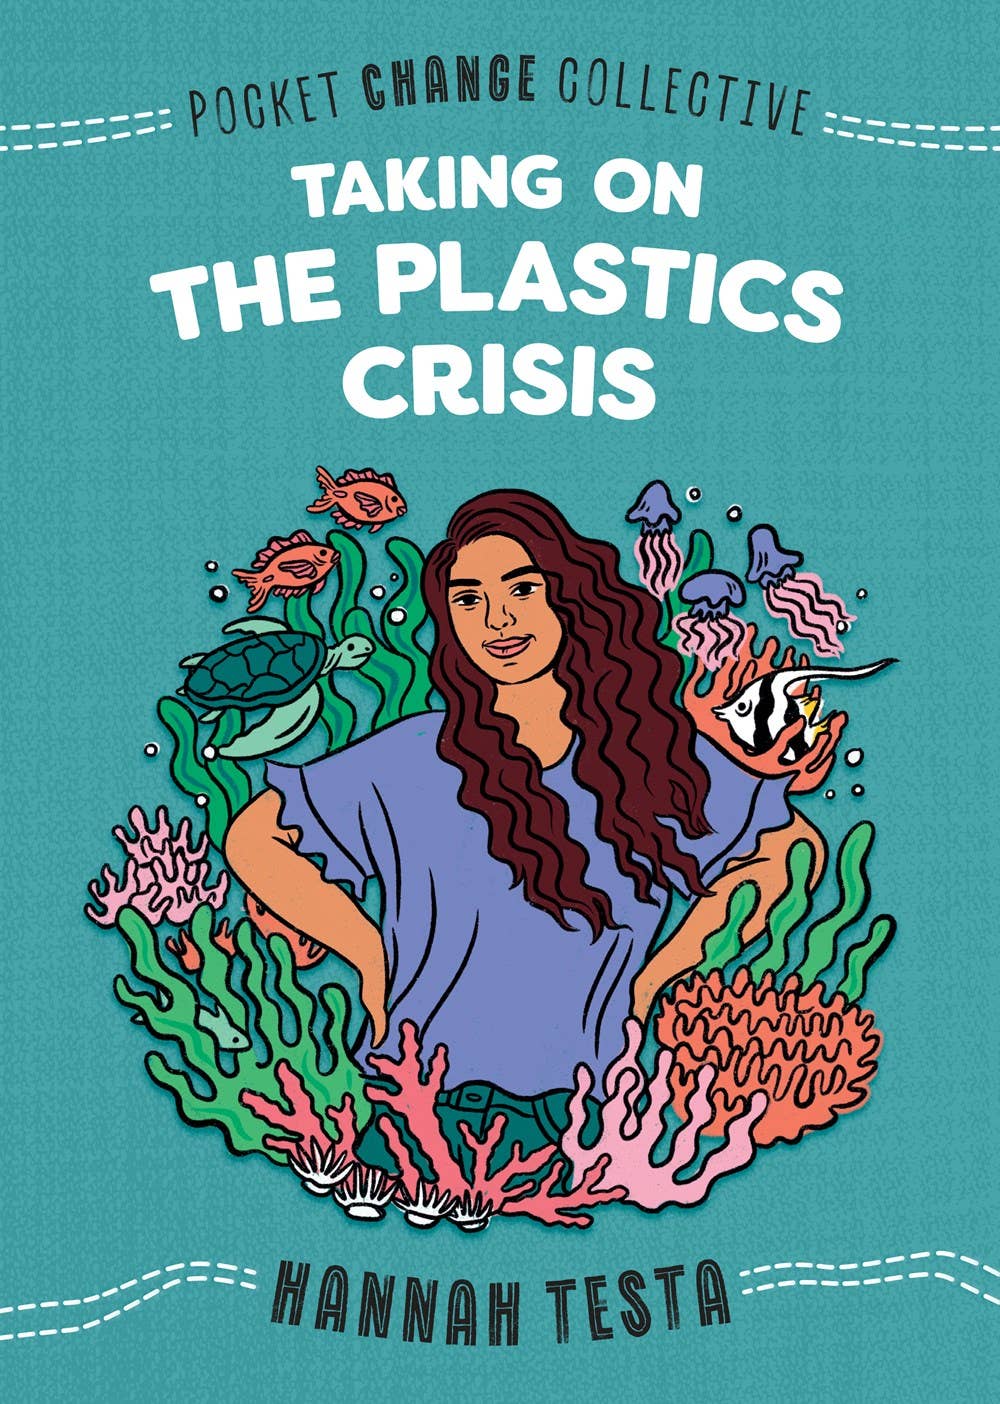 Taking on the Plastic Crisis (Pocket Change Collective)